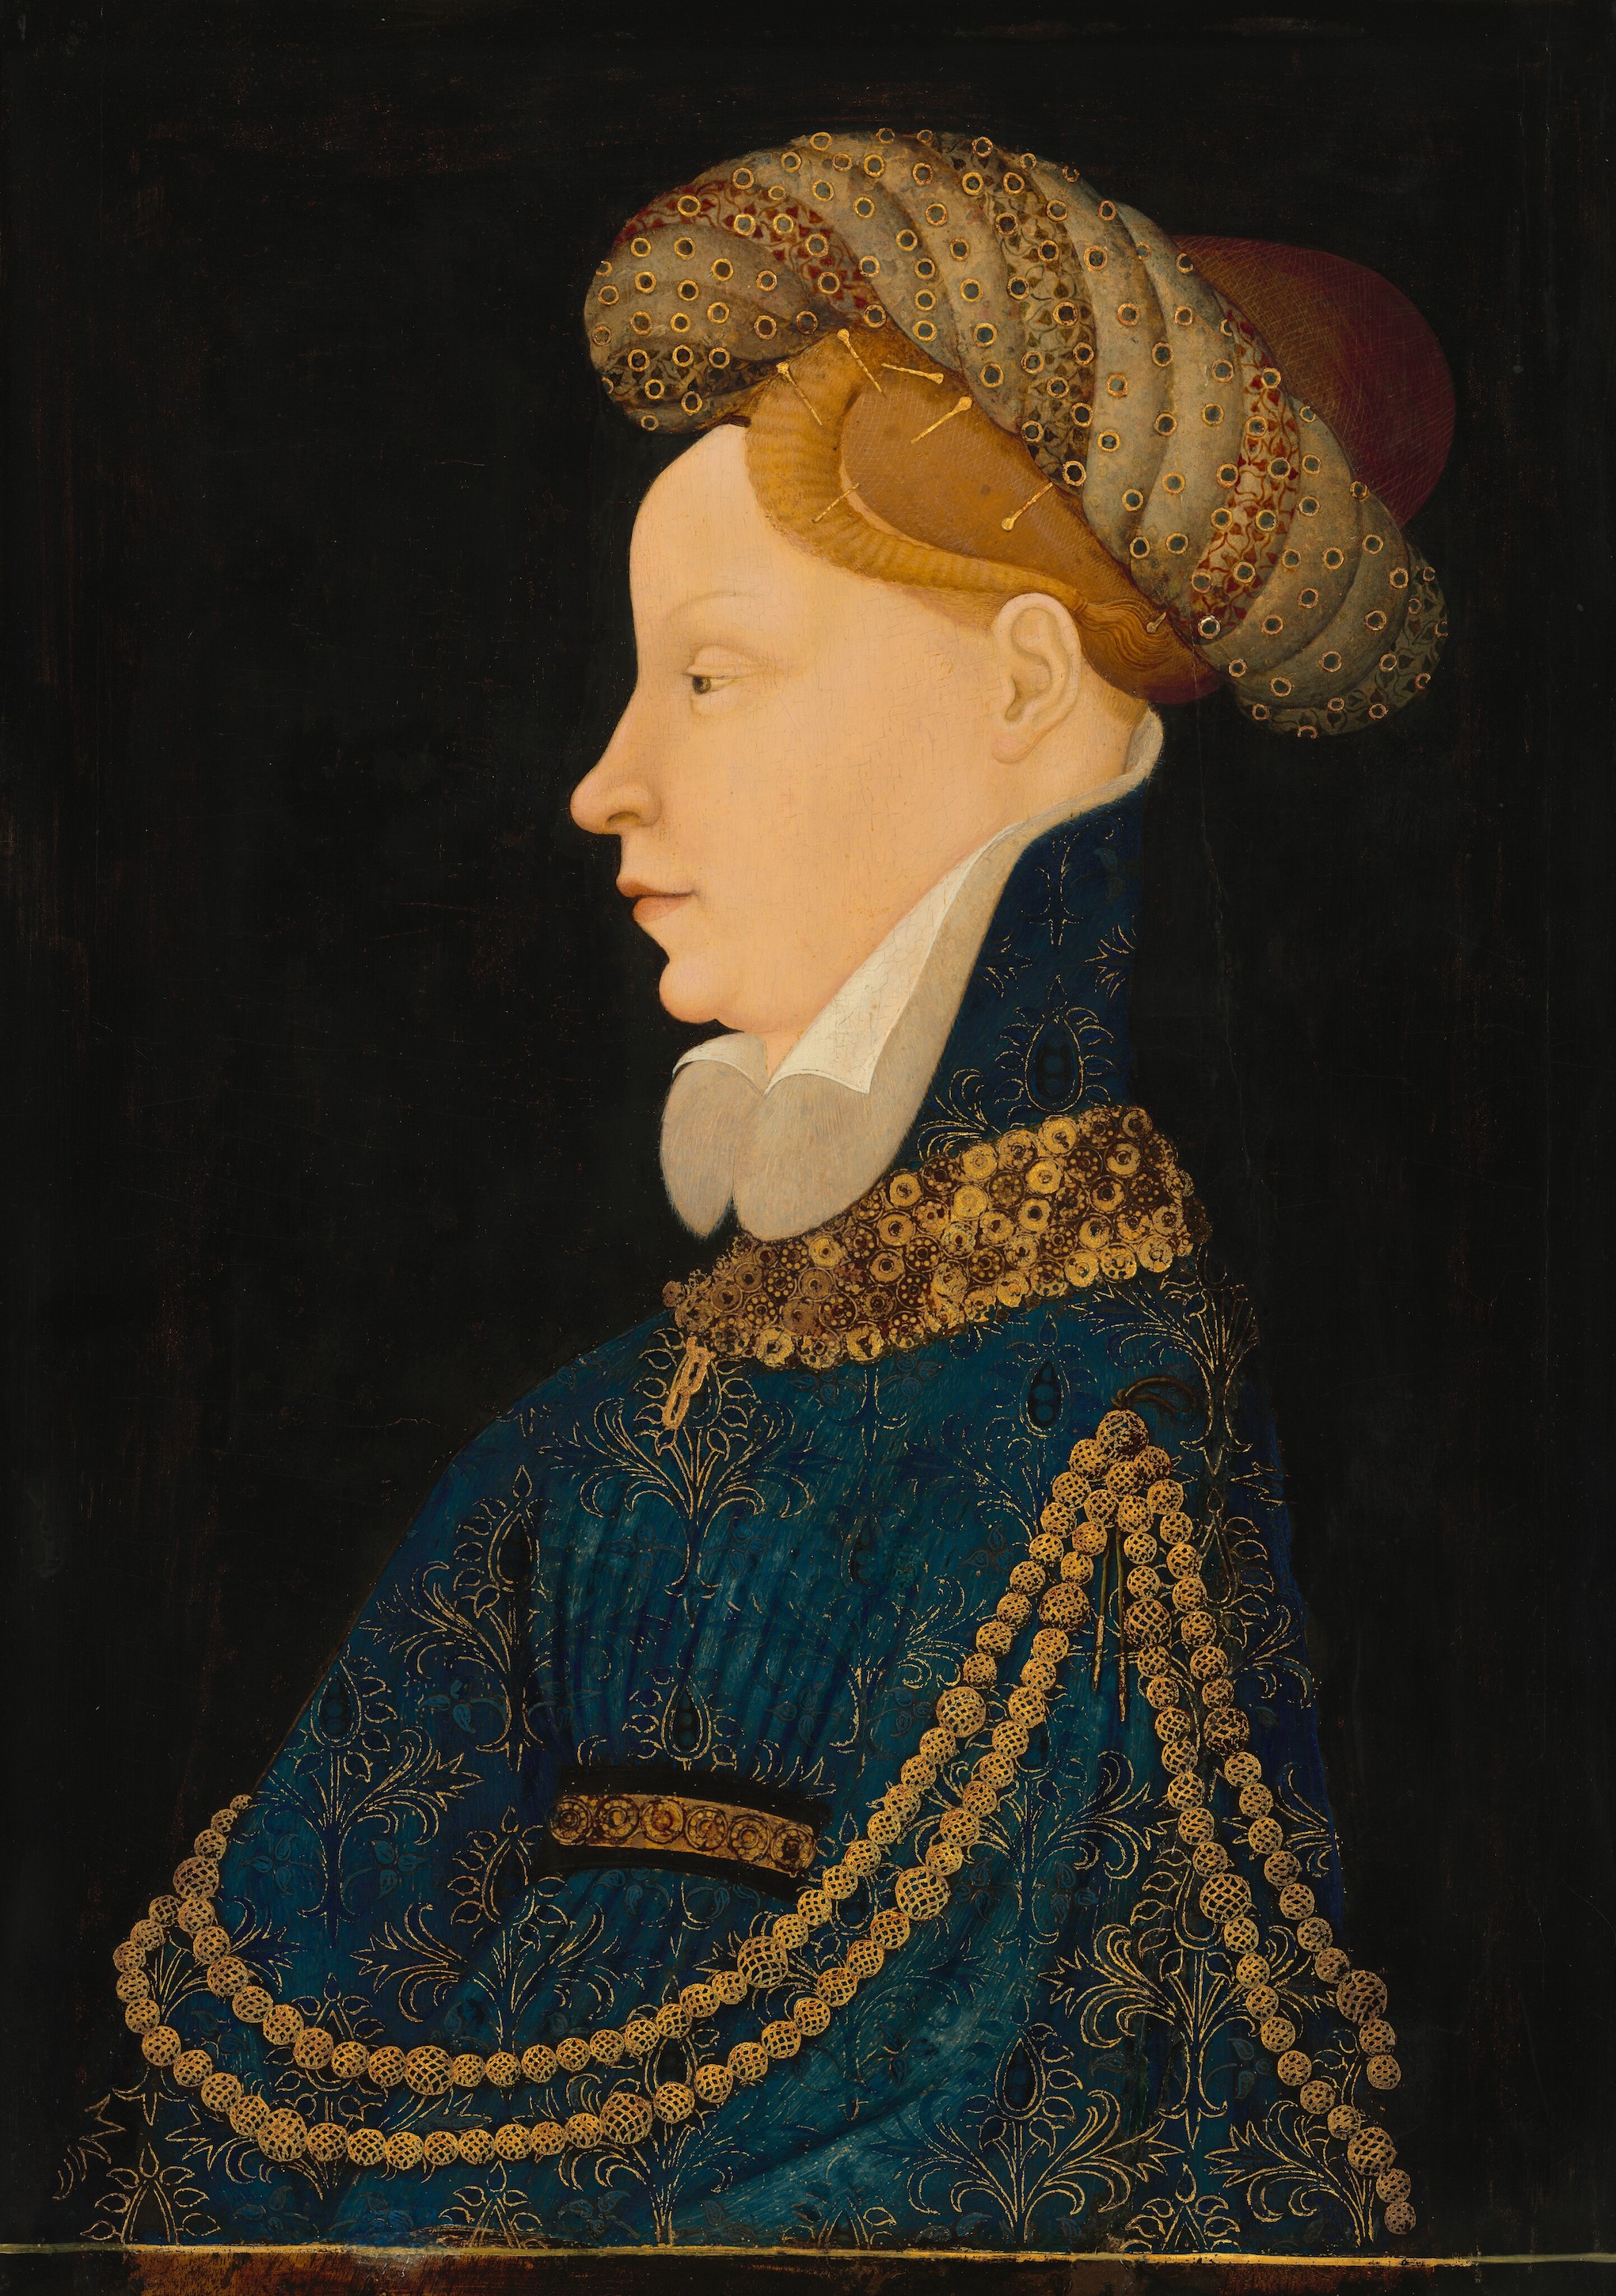 Profile Portrait of a Lady by Unknown Artist - c. 1410 - 52 x 36.6 cm National Gallery of Art